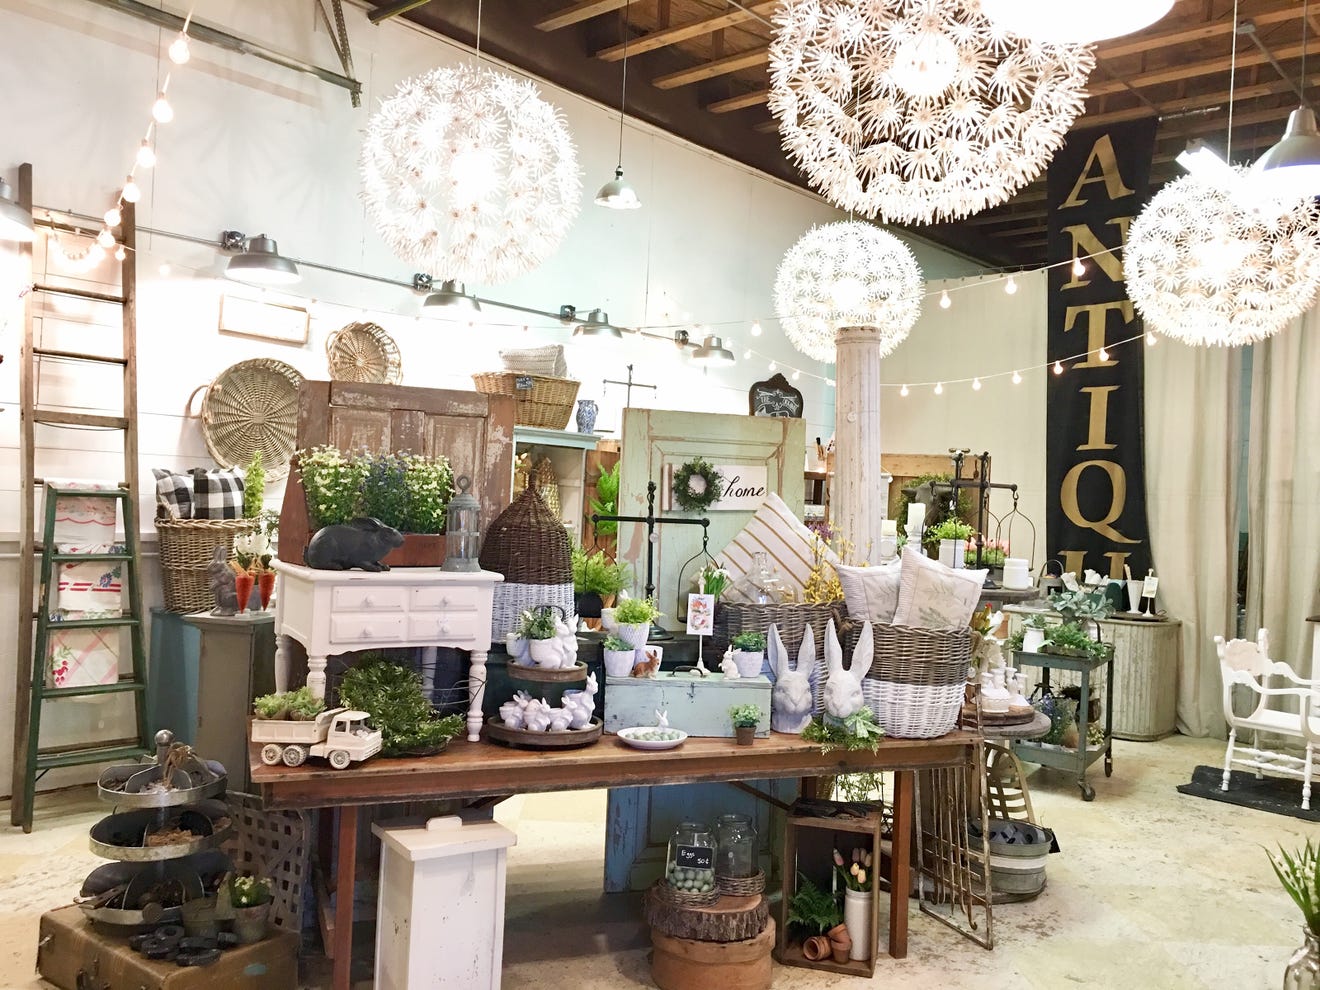 Vintage Shop Hop features more than 500 antique stores in Wisconsin and